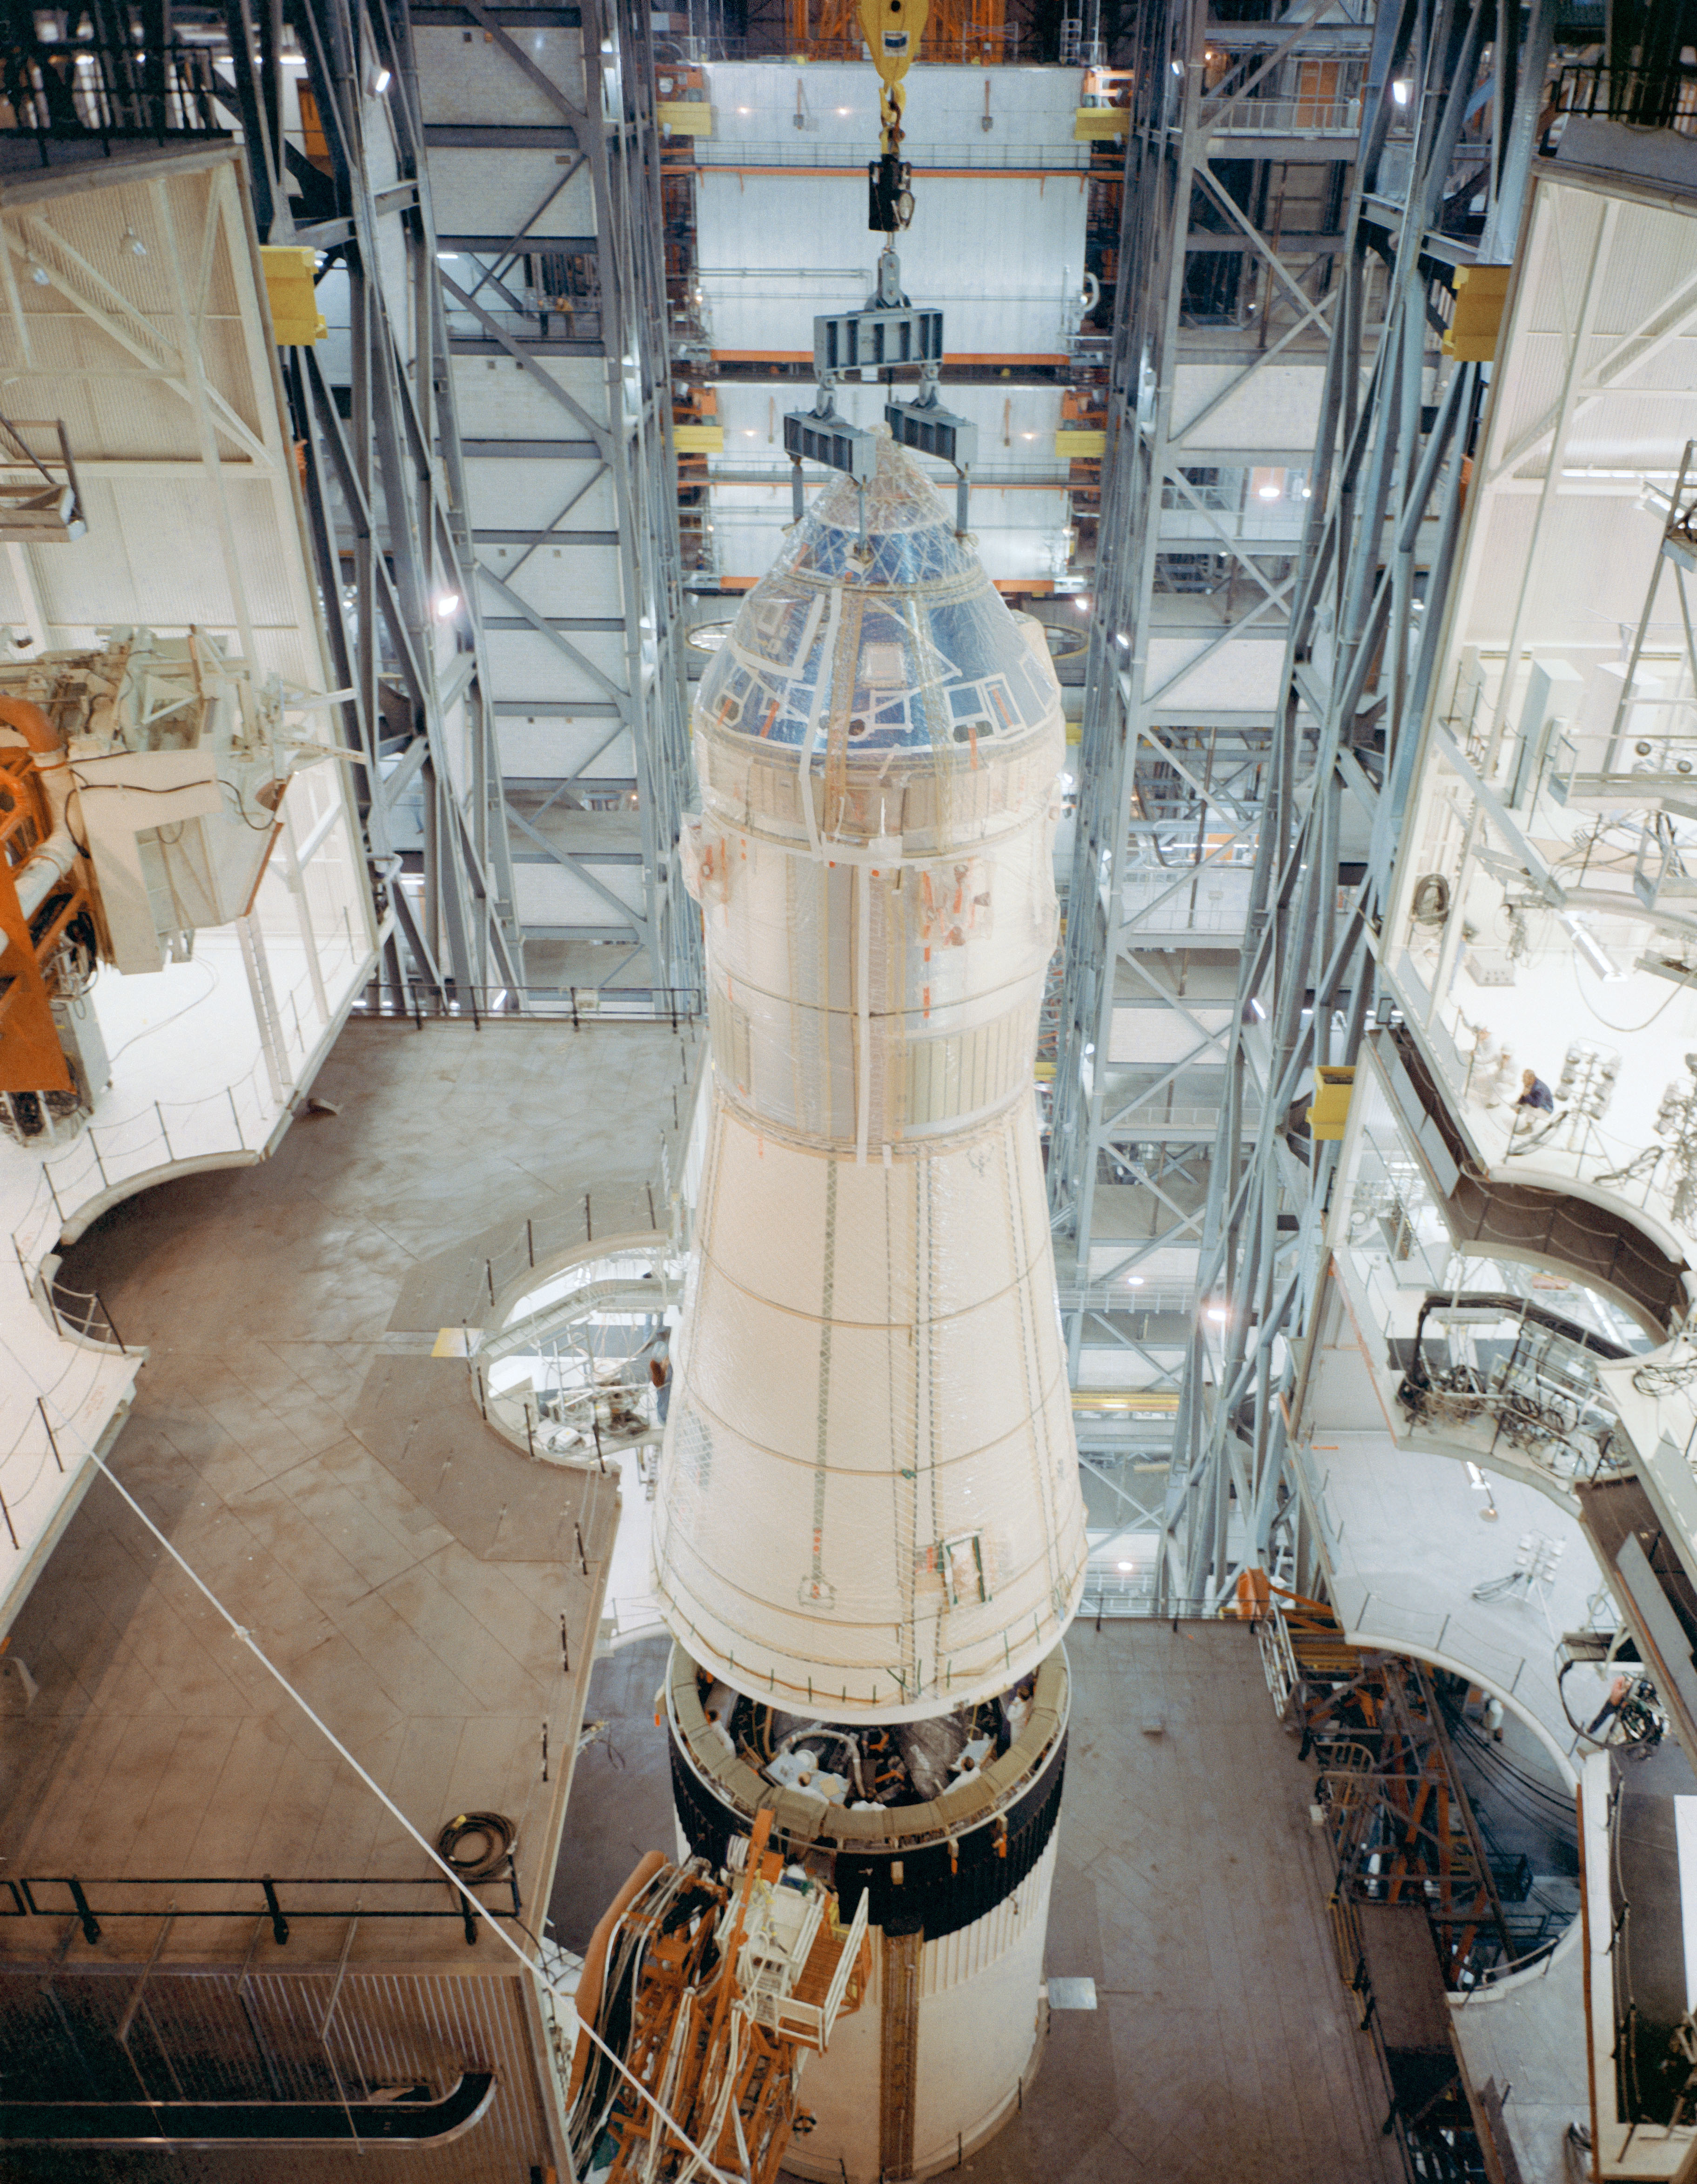 Workers lower the spacecraft onto the Saturn V rocket's third stage